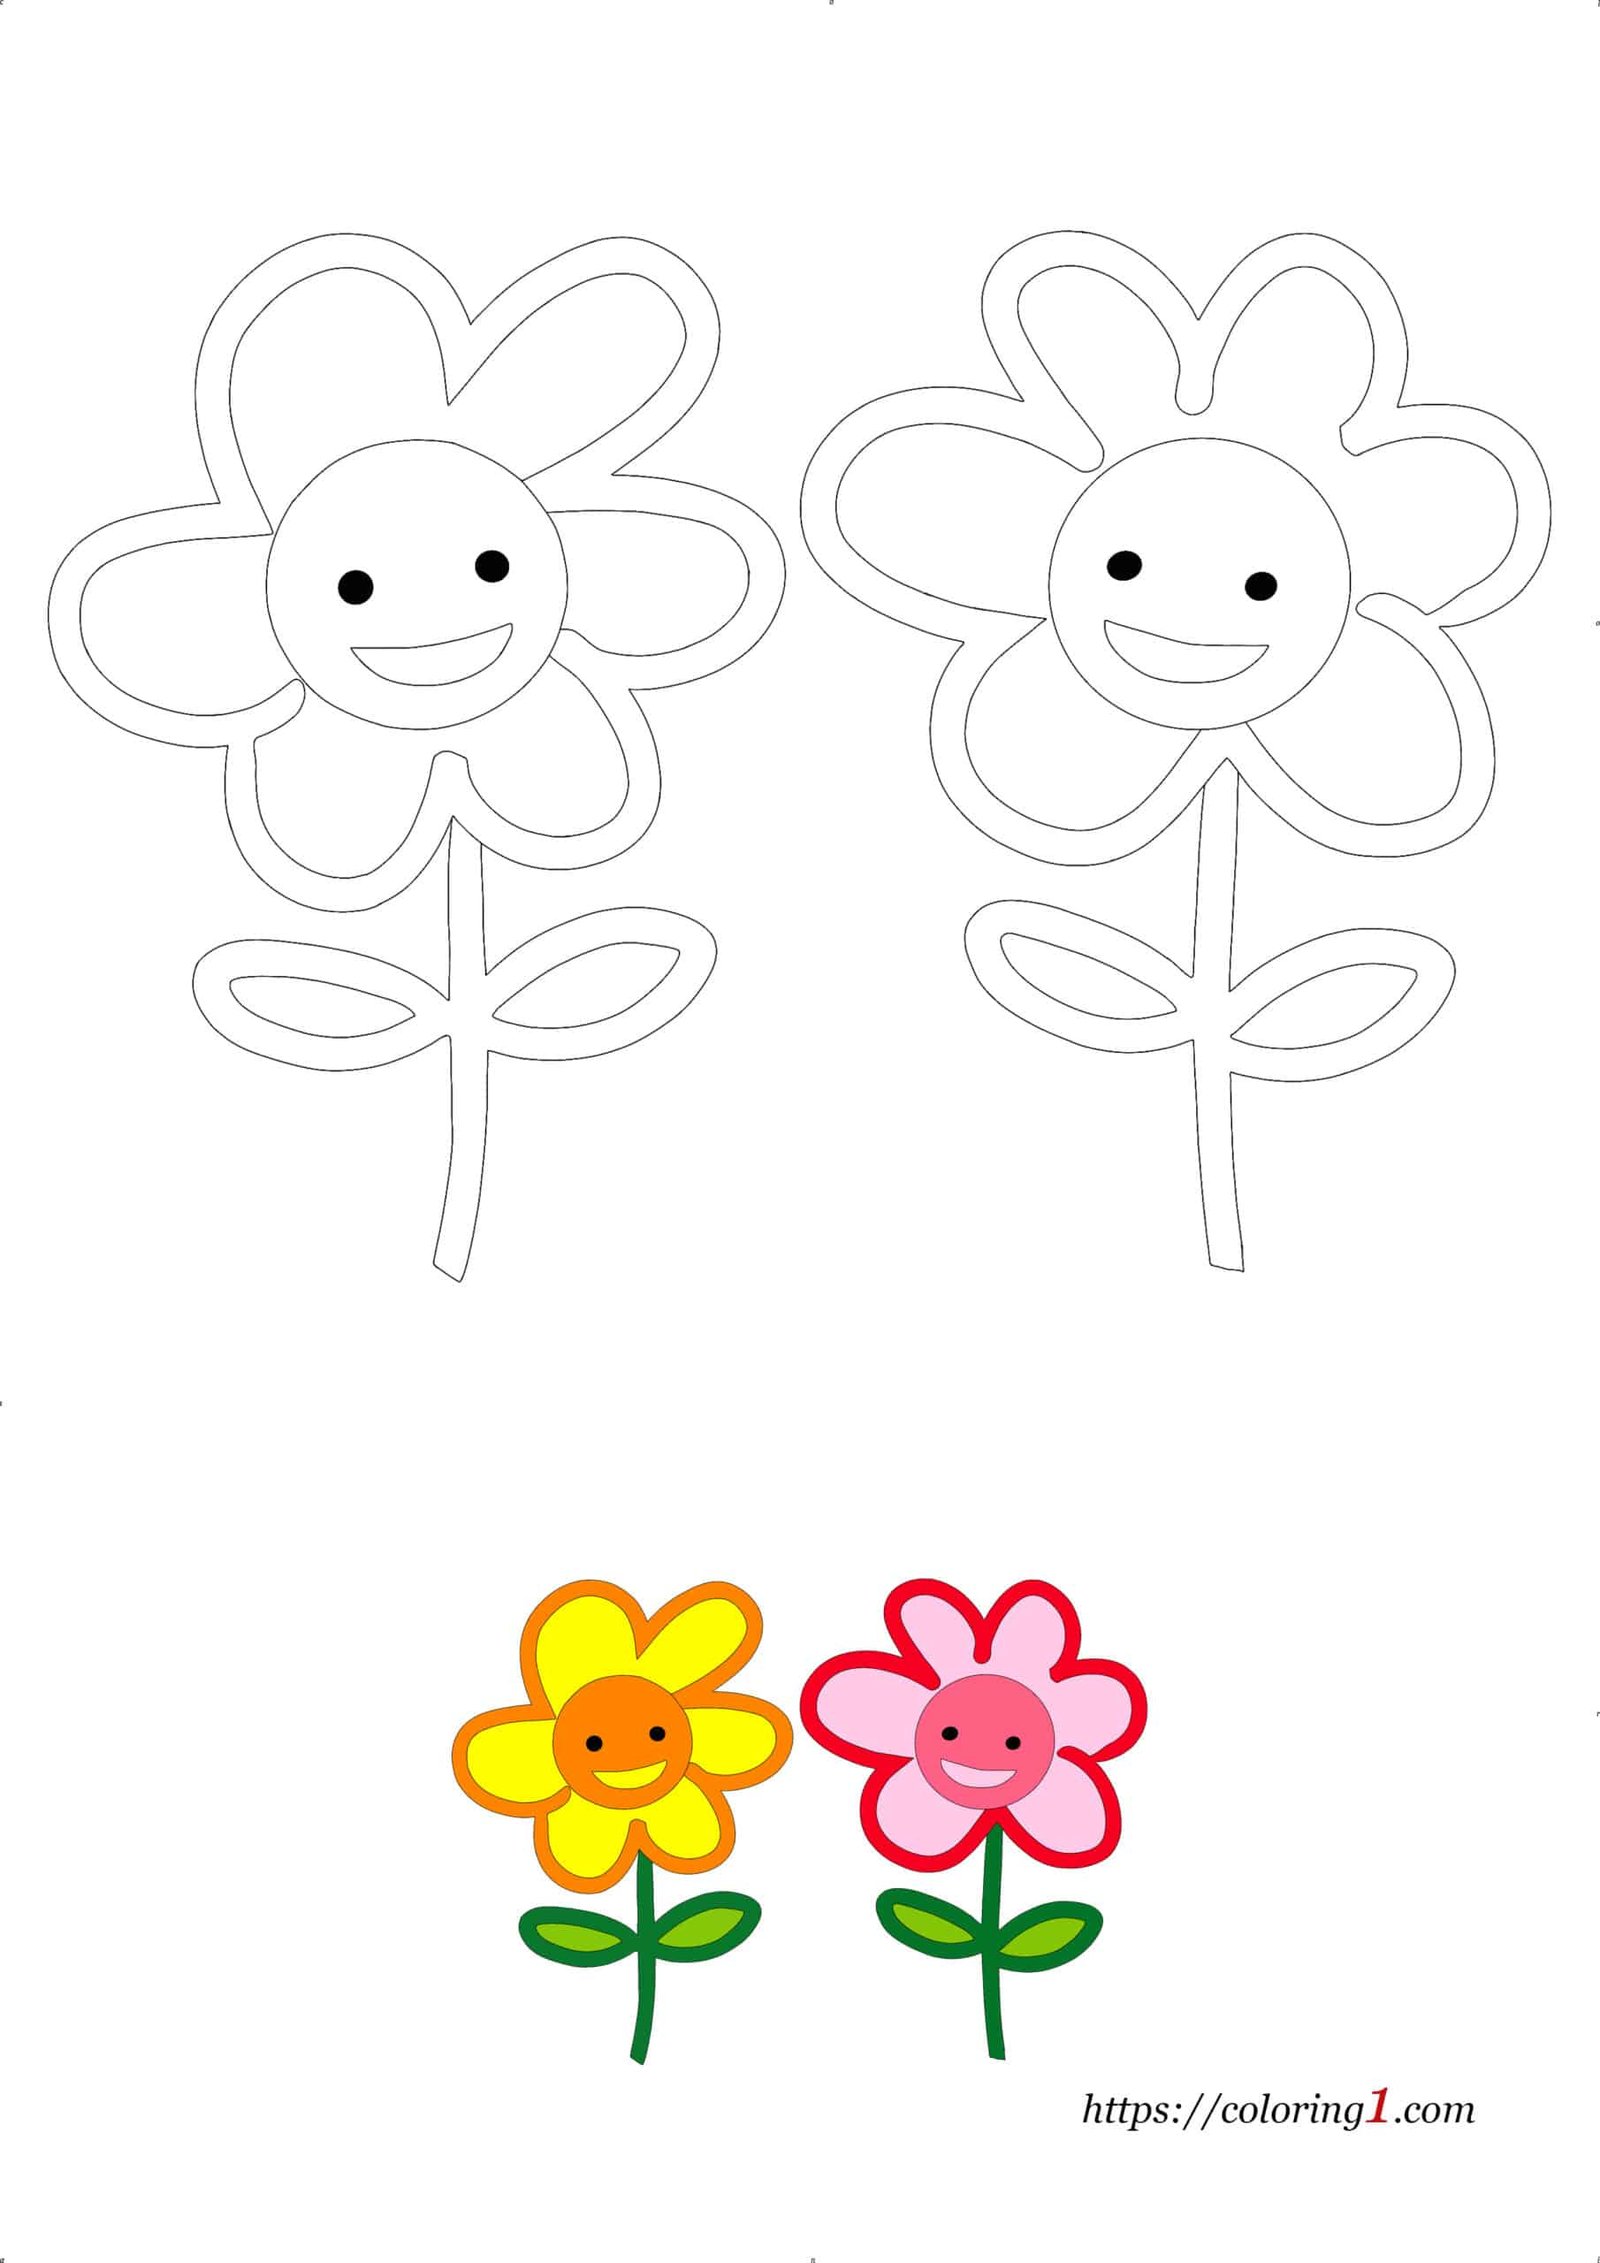 6 Petals Flowers easy printable coloring page for kids